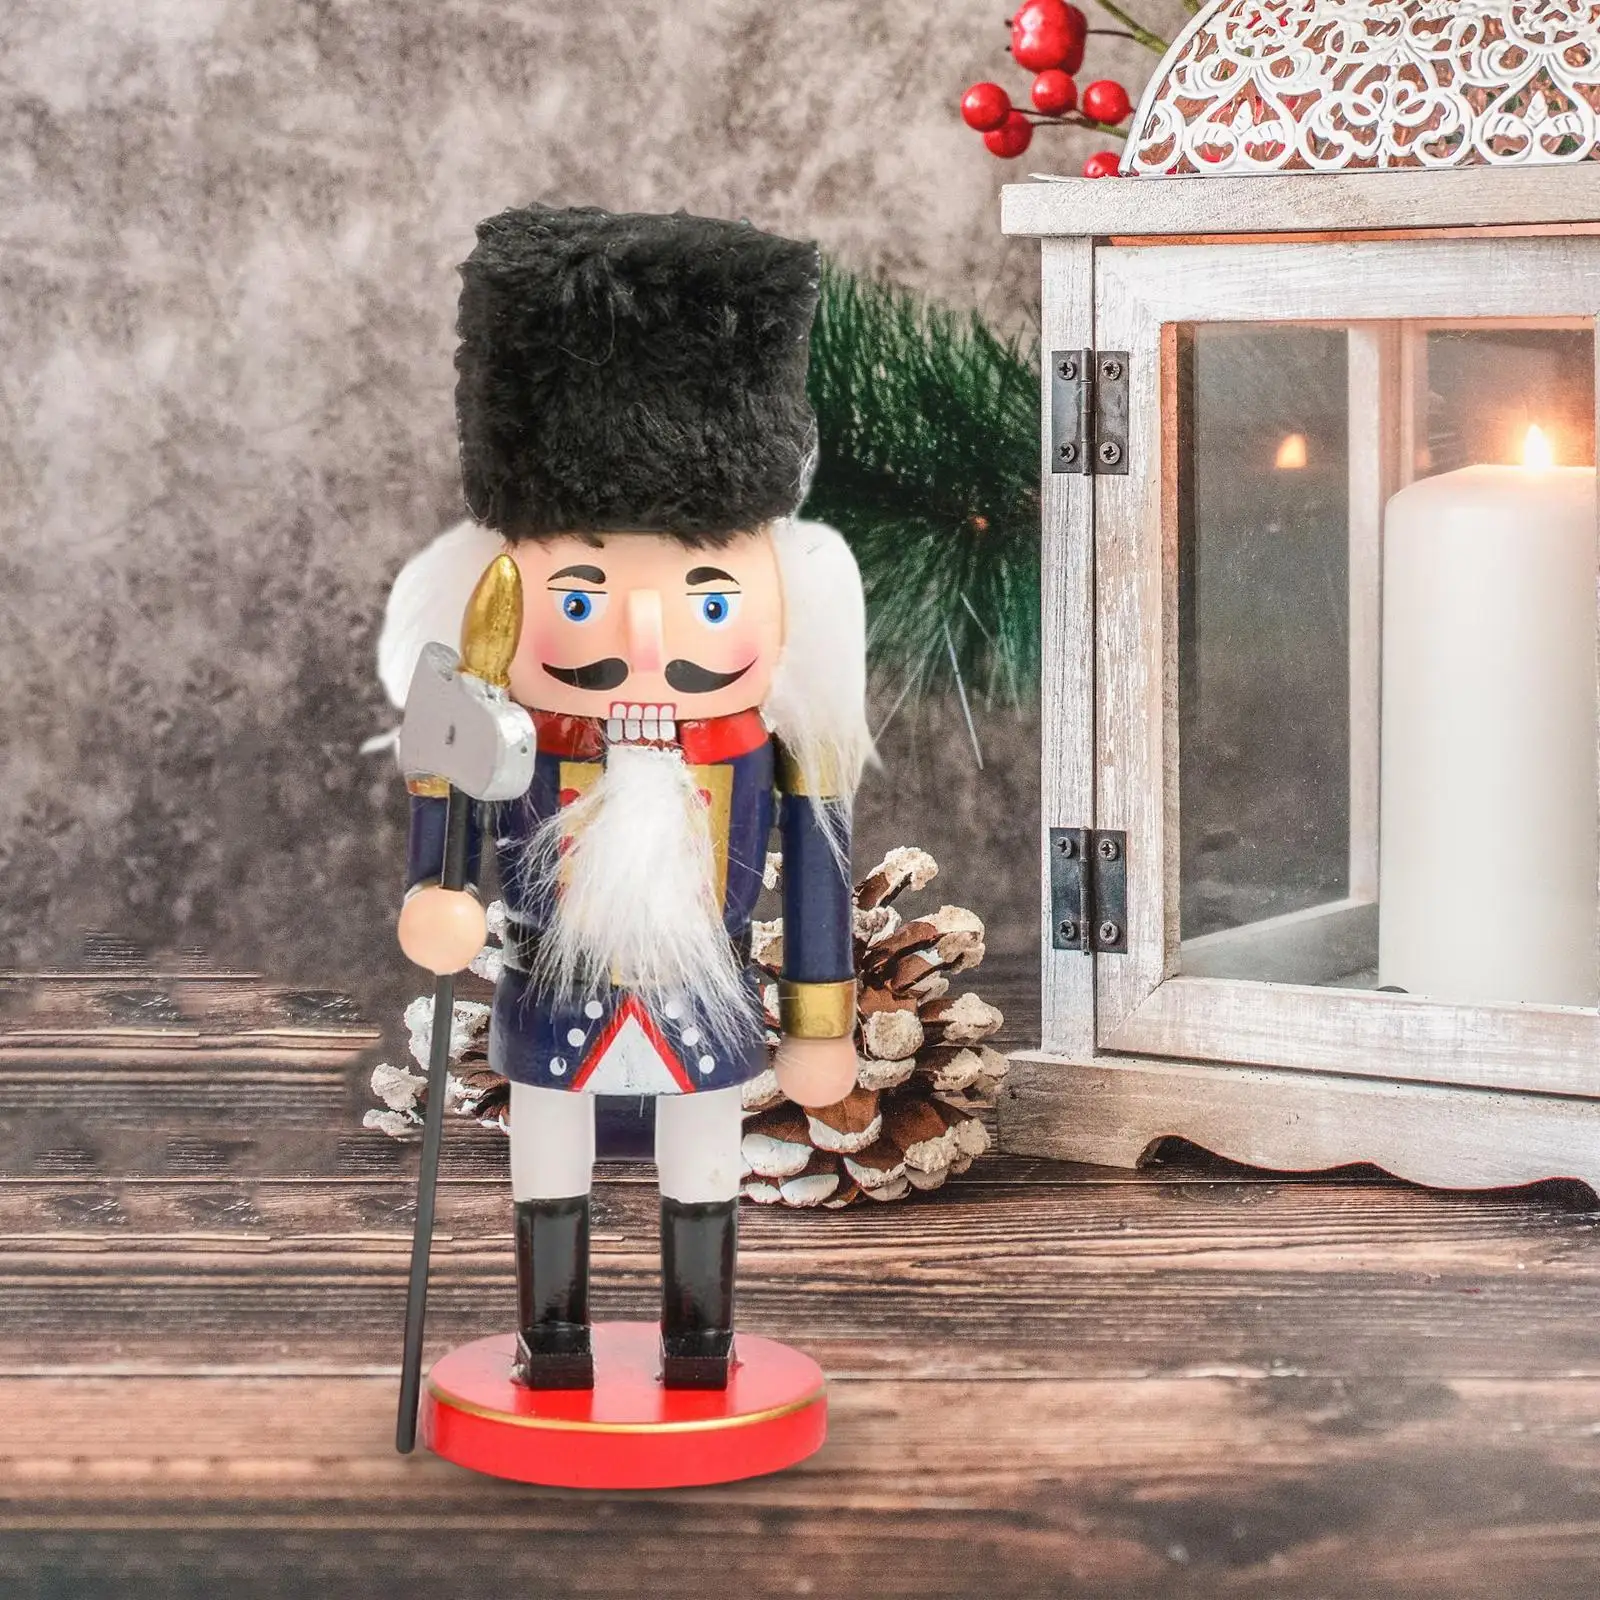 Wood Nutcracker Soldier Model Handpainted Puppet Doll Free Standing Creative for Bookcase Holiday Desktop Decoration Ornament